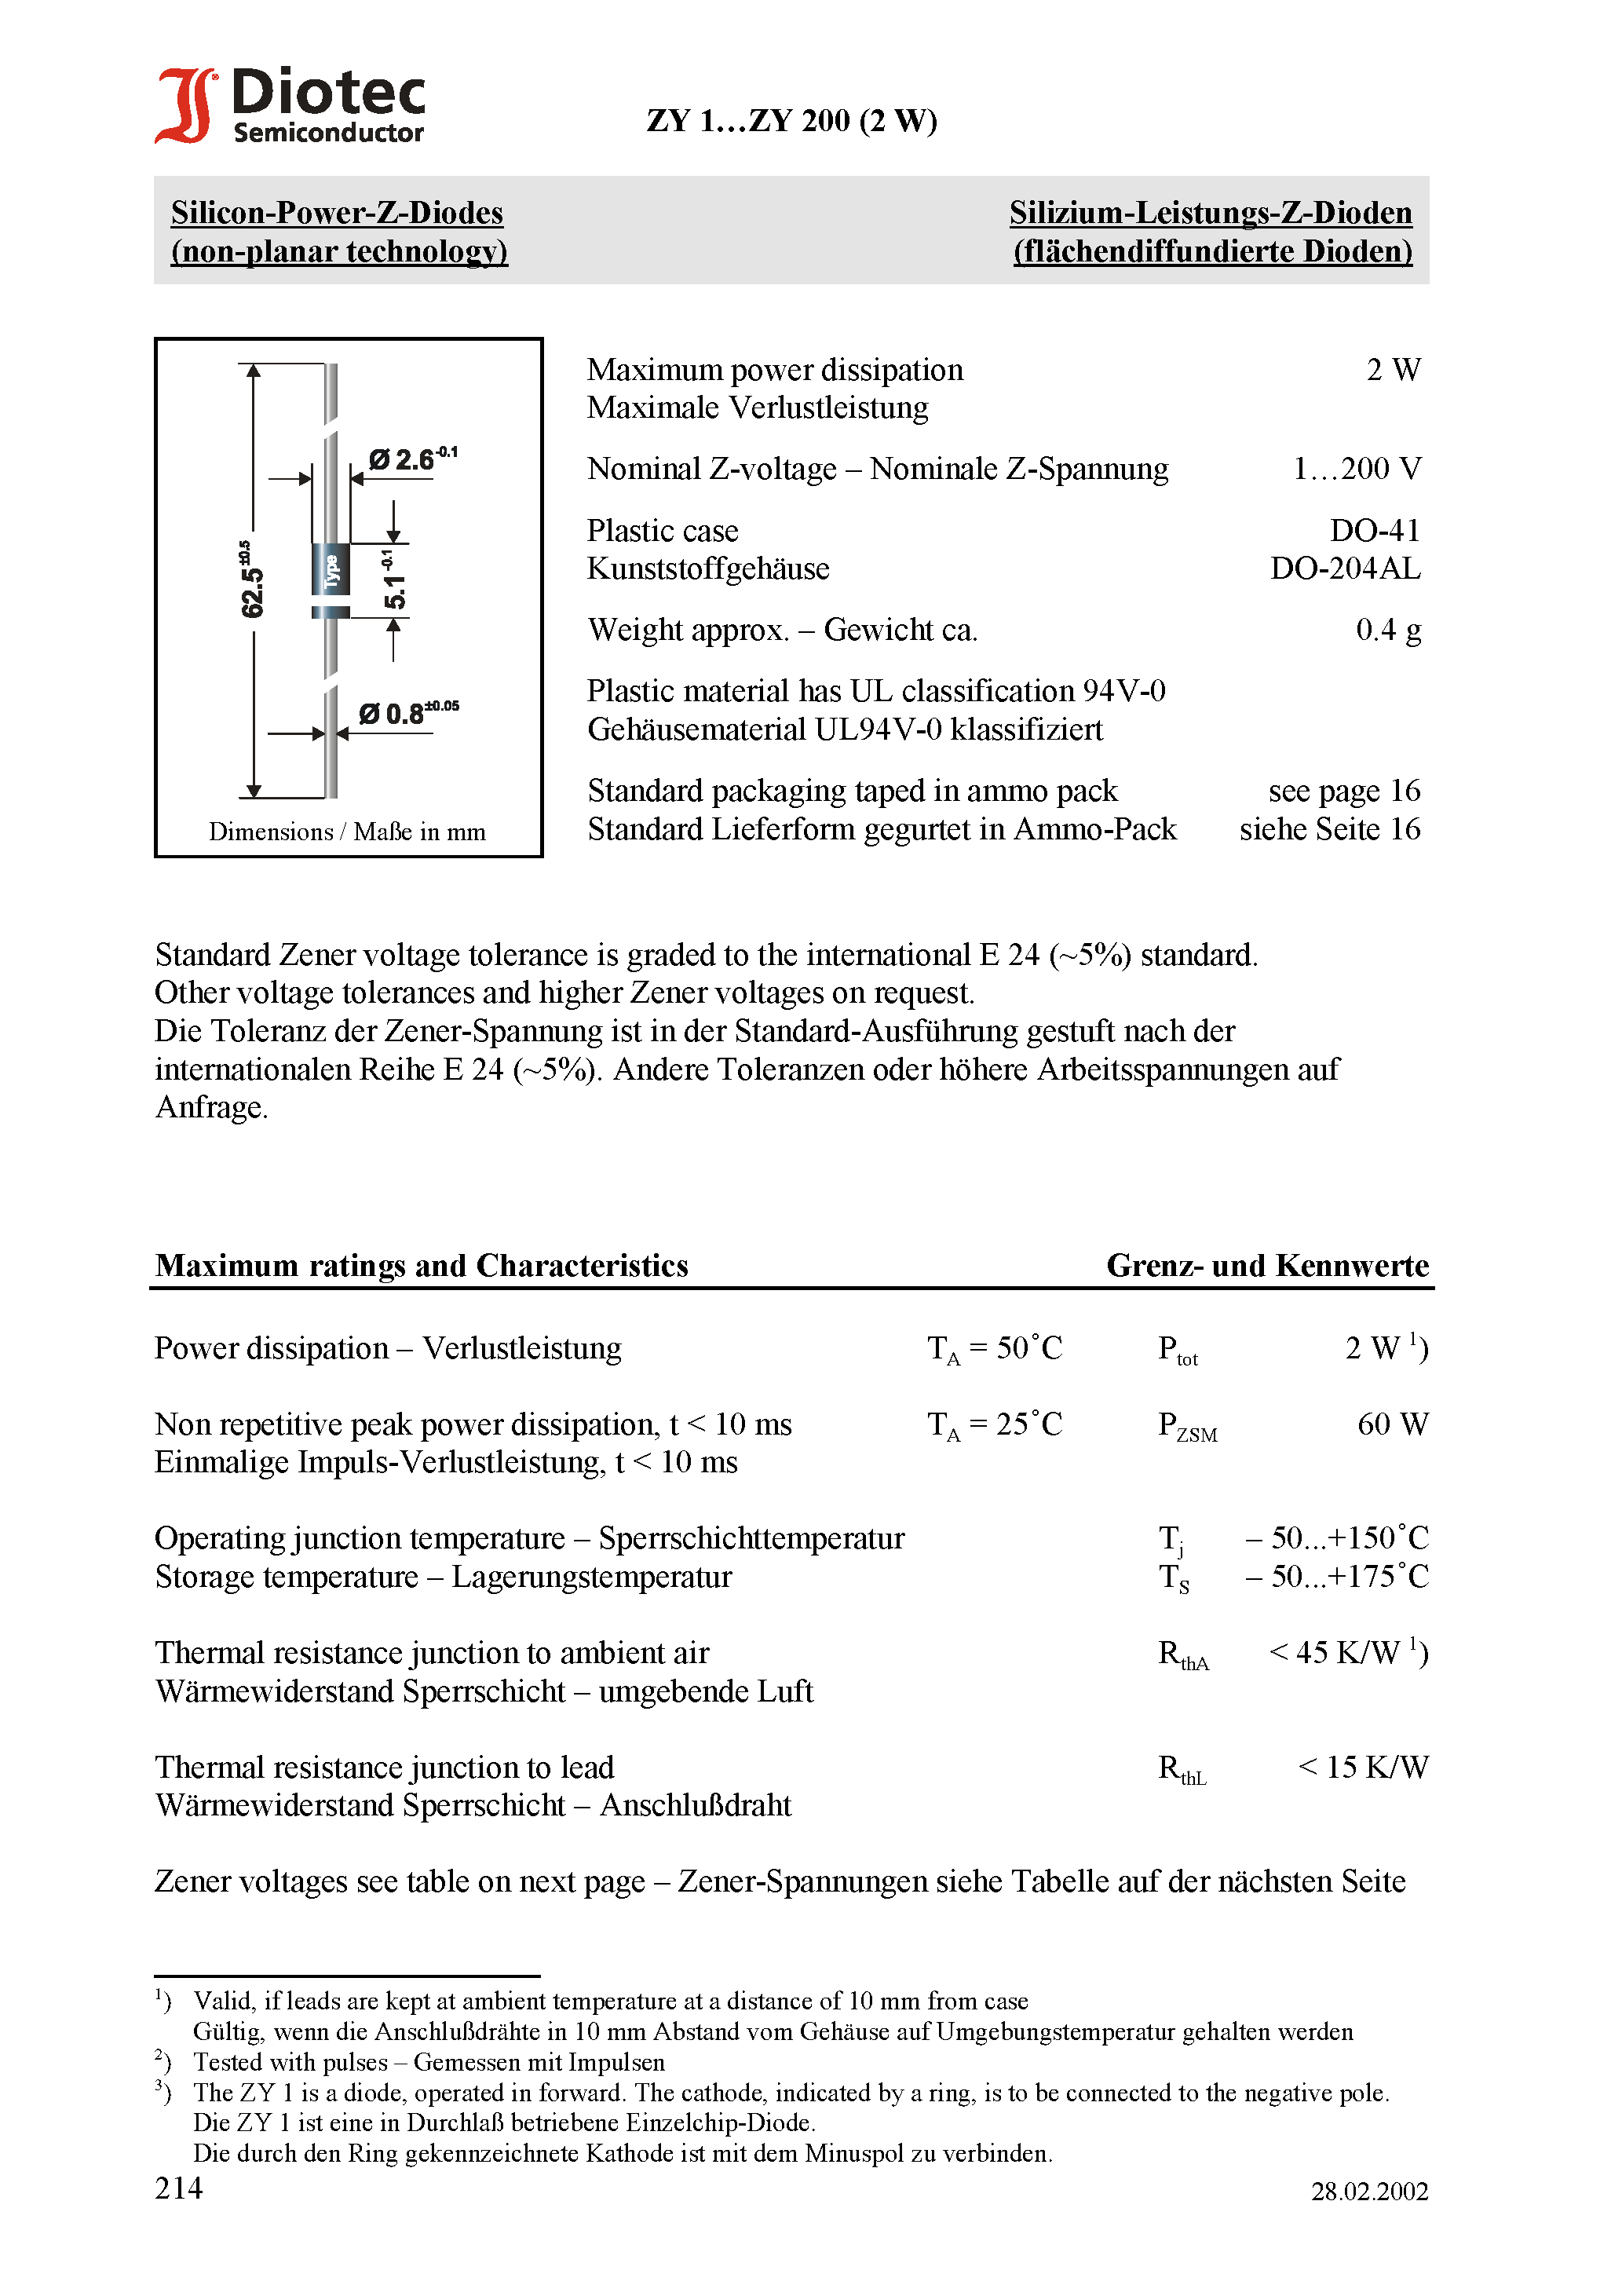 Datasheet ZY6.2 - Silicon-Power-Z-Diodes (non-planar technology) page 1